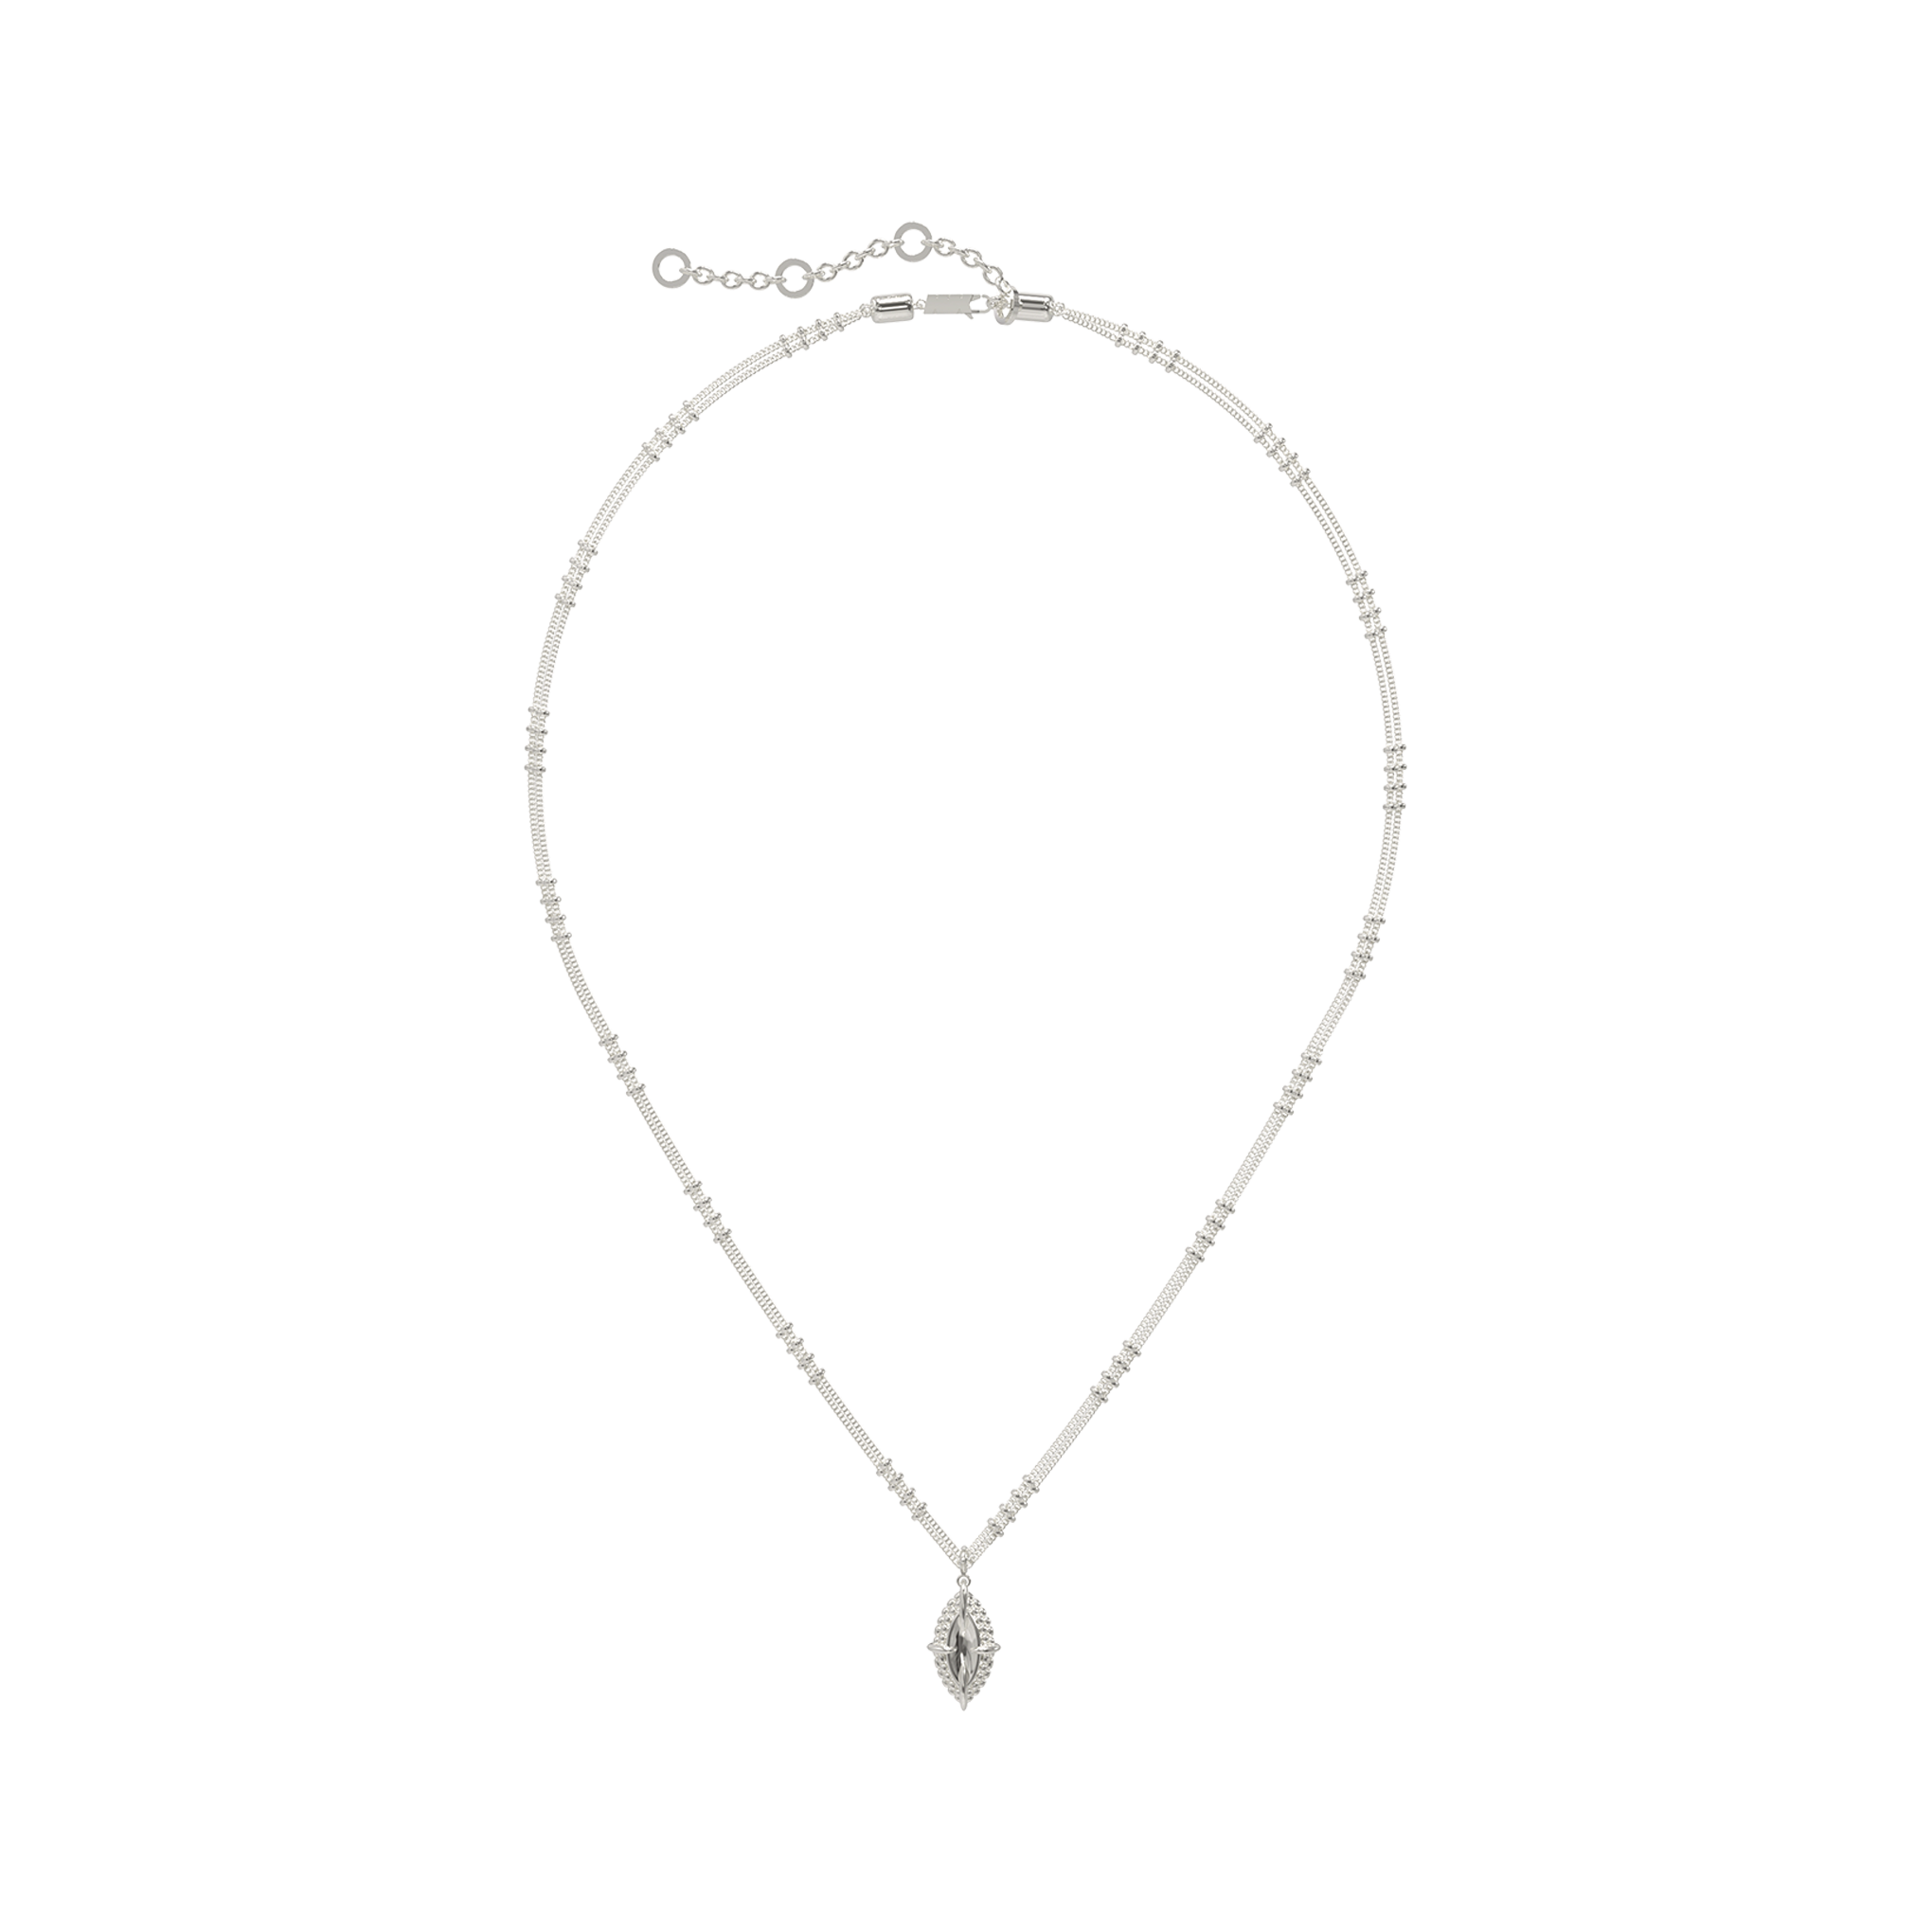 DOUBLE LOOP LONG NECKLACE - ROUND BEAD CONCAVE PENDANT